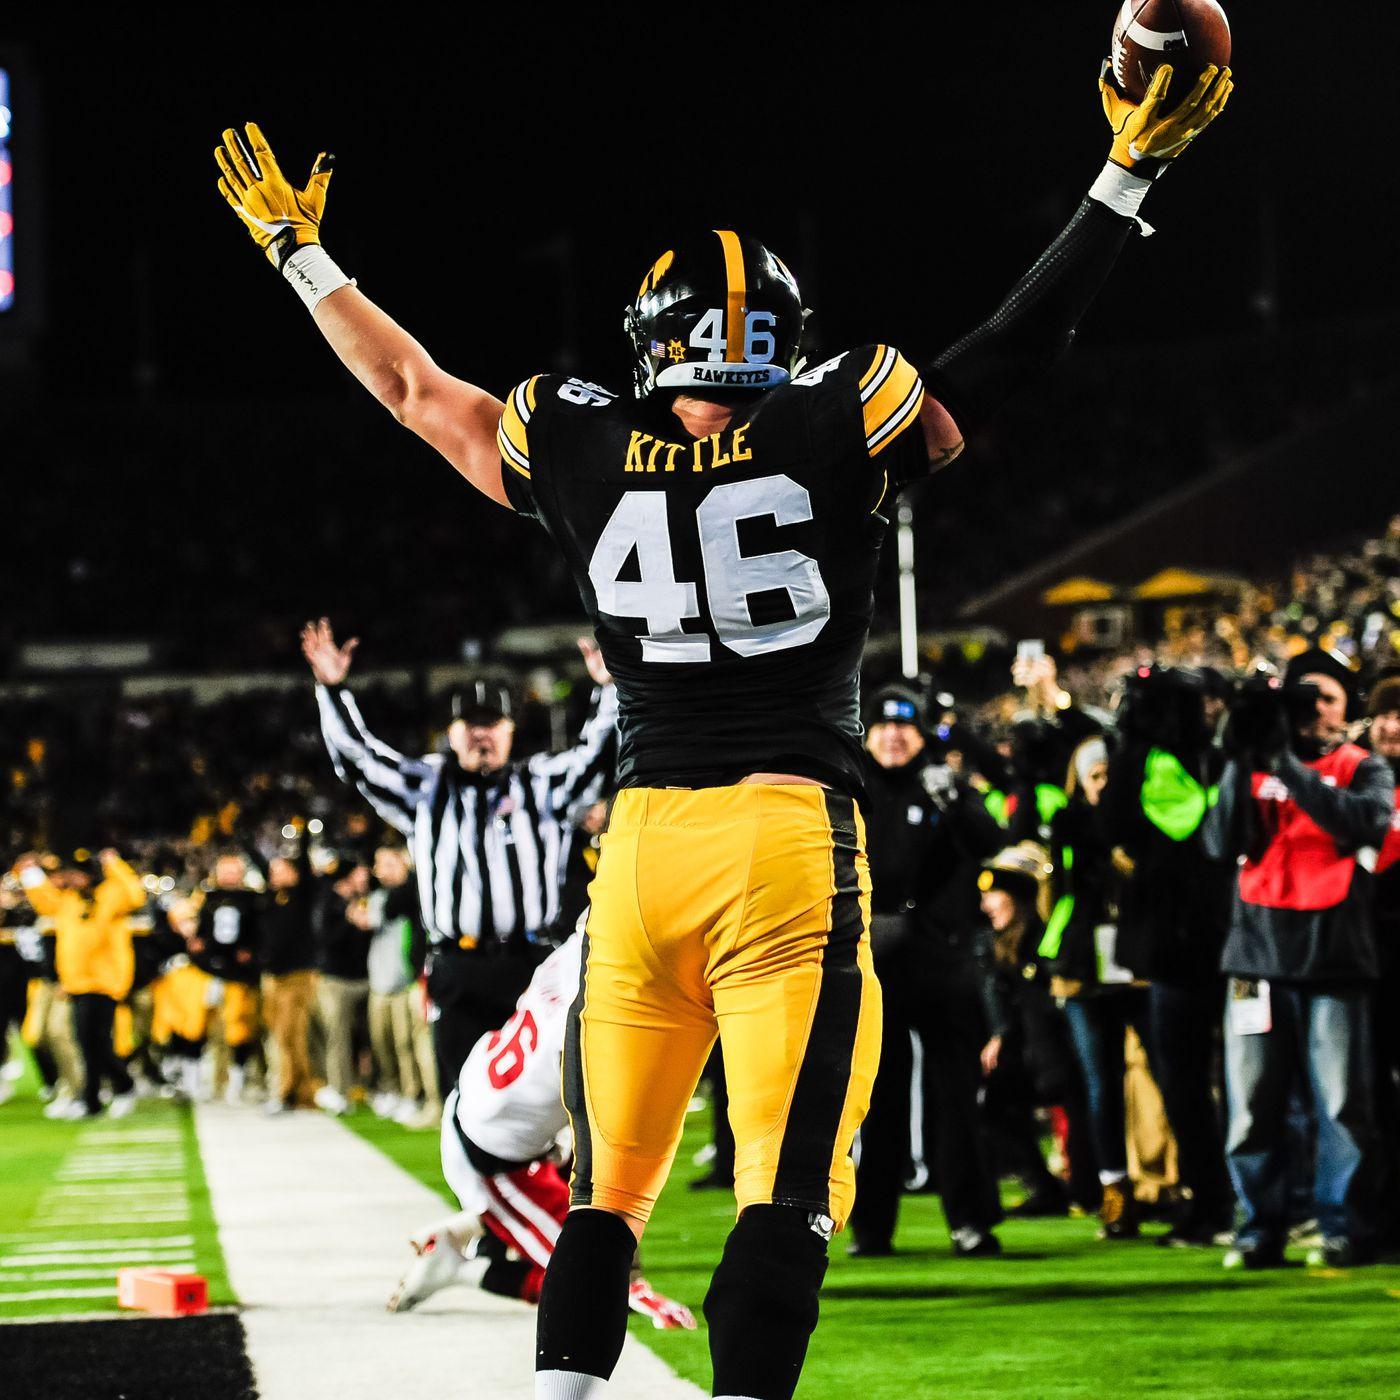 GEORGE KITTLE SELECTED BY THE 49ERS IN THE 5TH ROUND OF THE